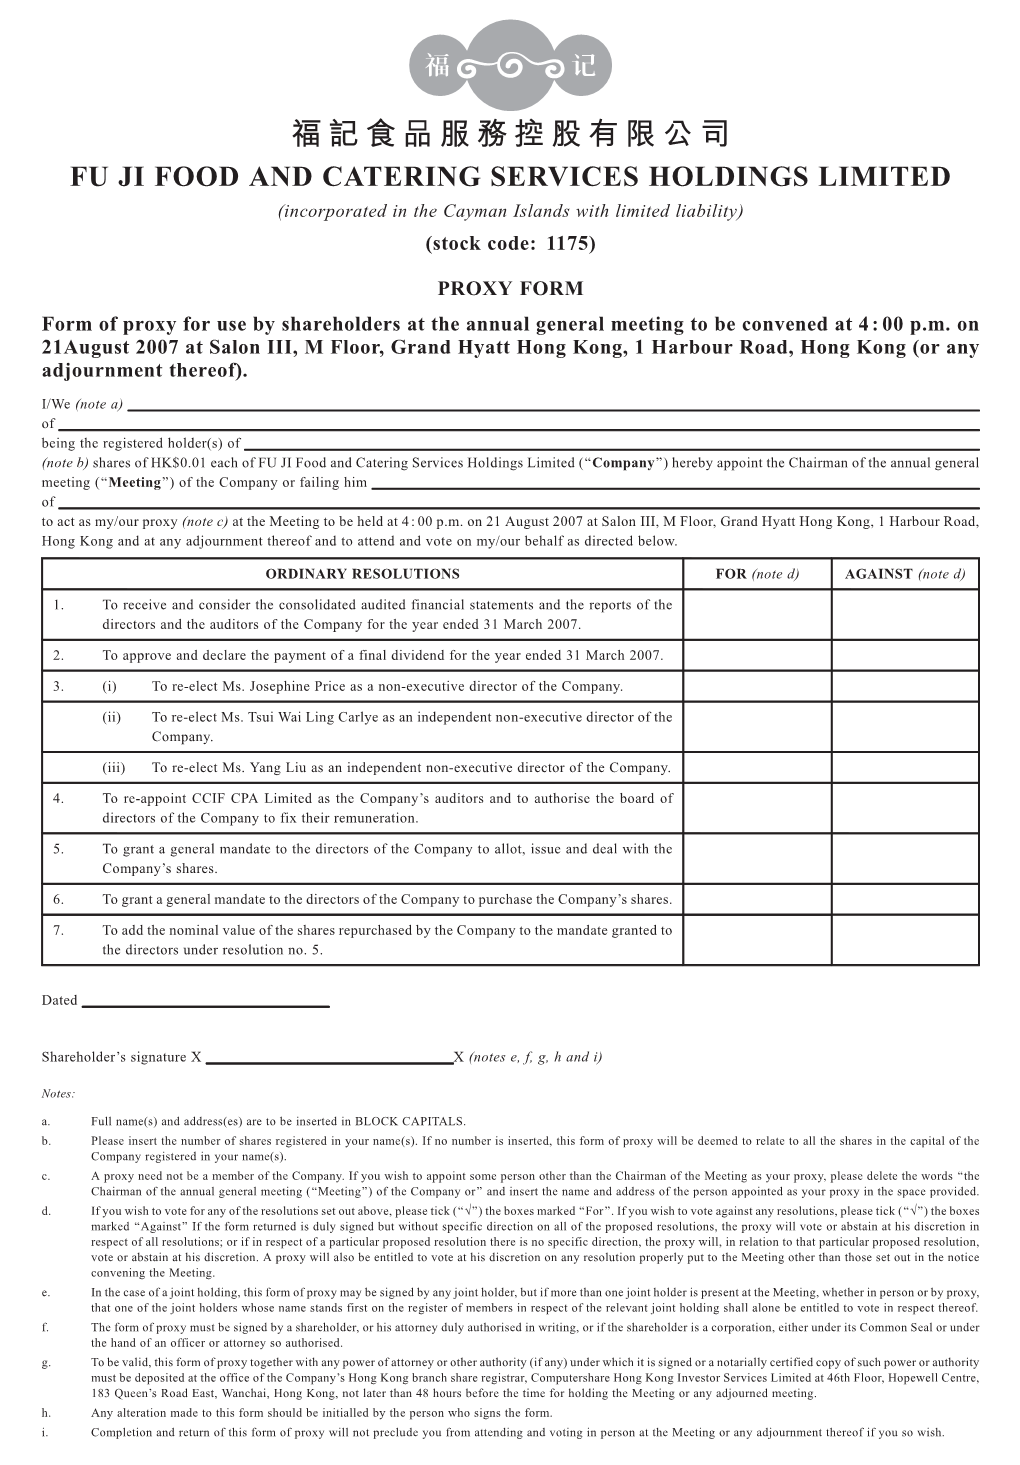 Proxy Form for the Annual General Meeting of 21 August 2007